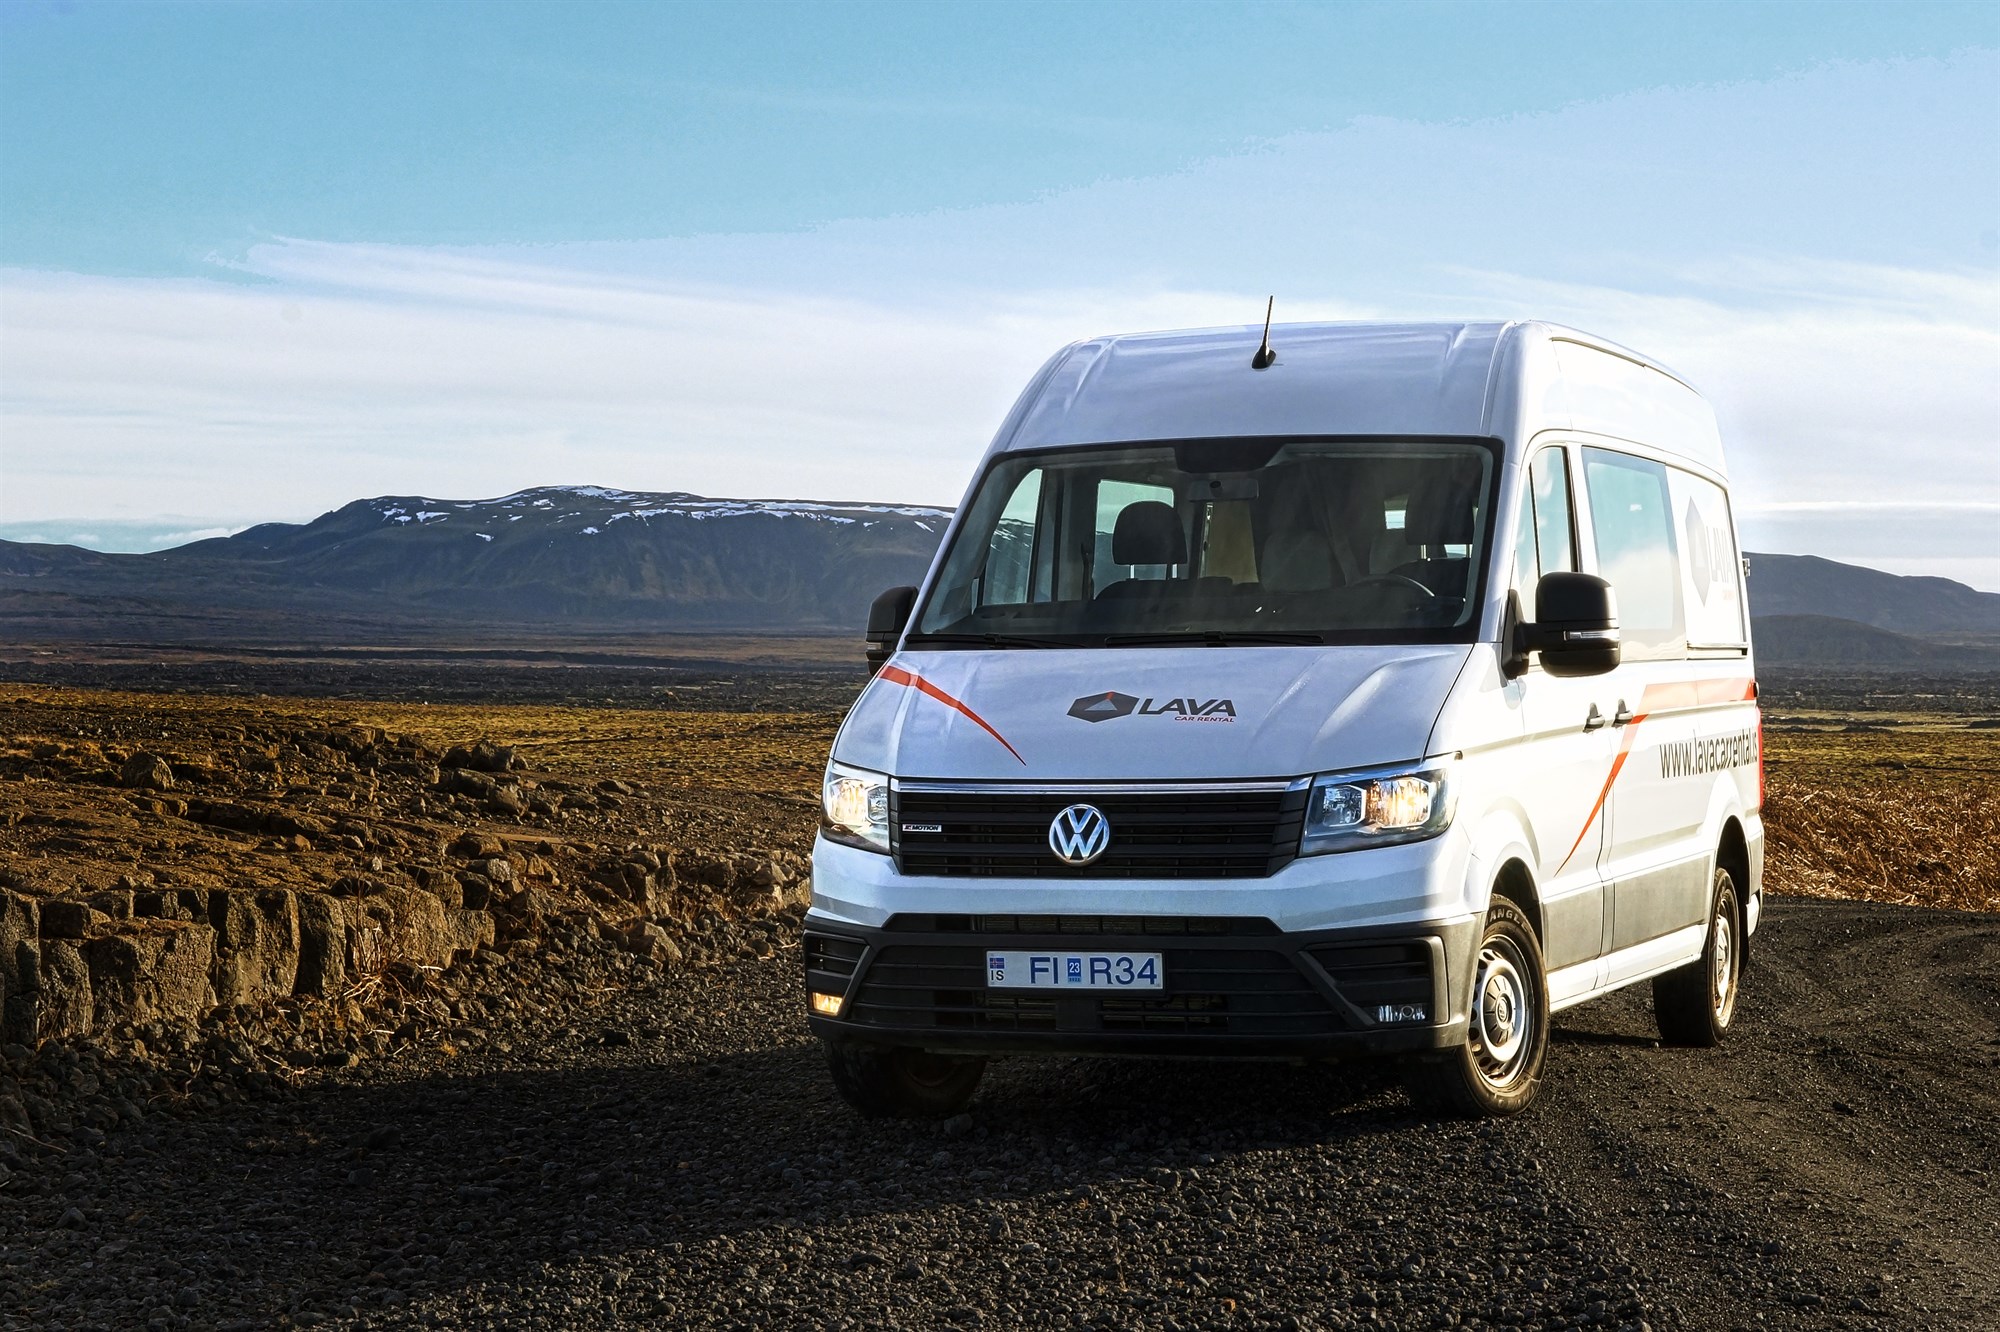 Hire a VW Crafter 4x4 Camper Van for your trip to Iceland